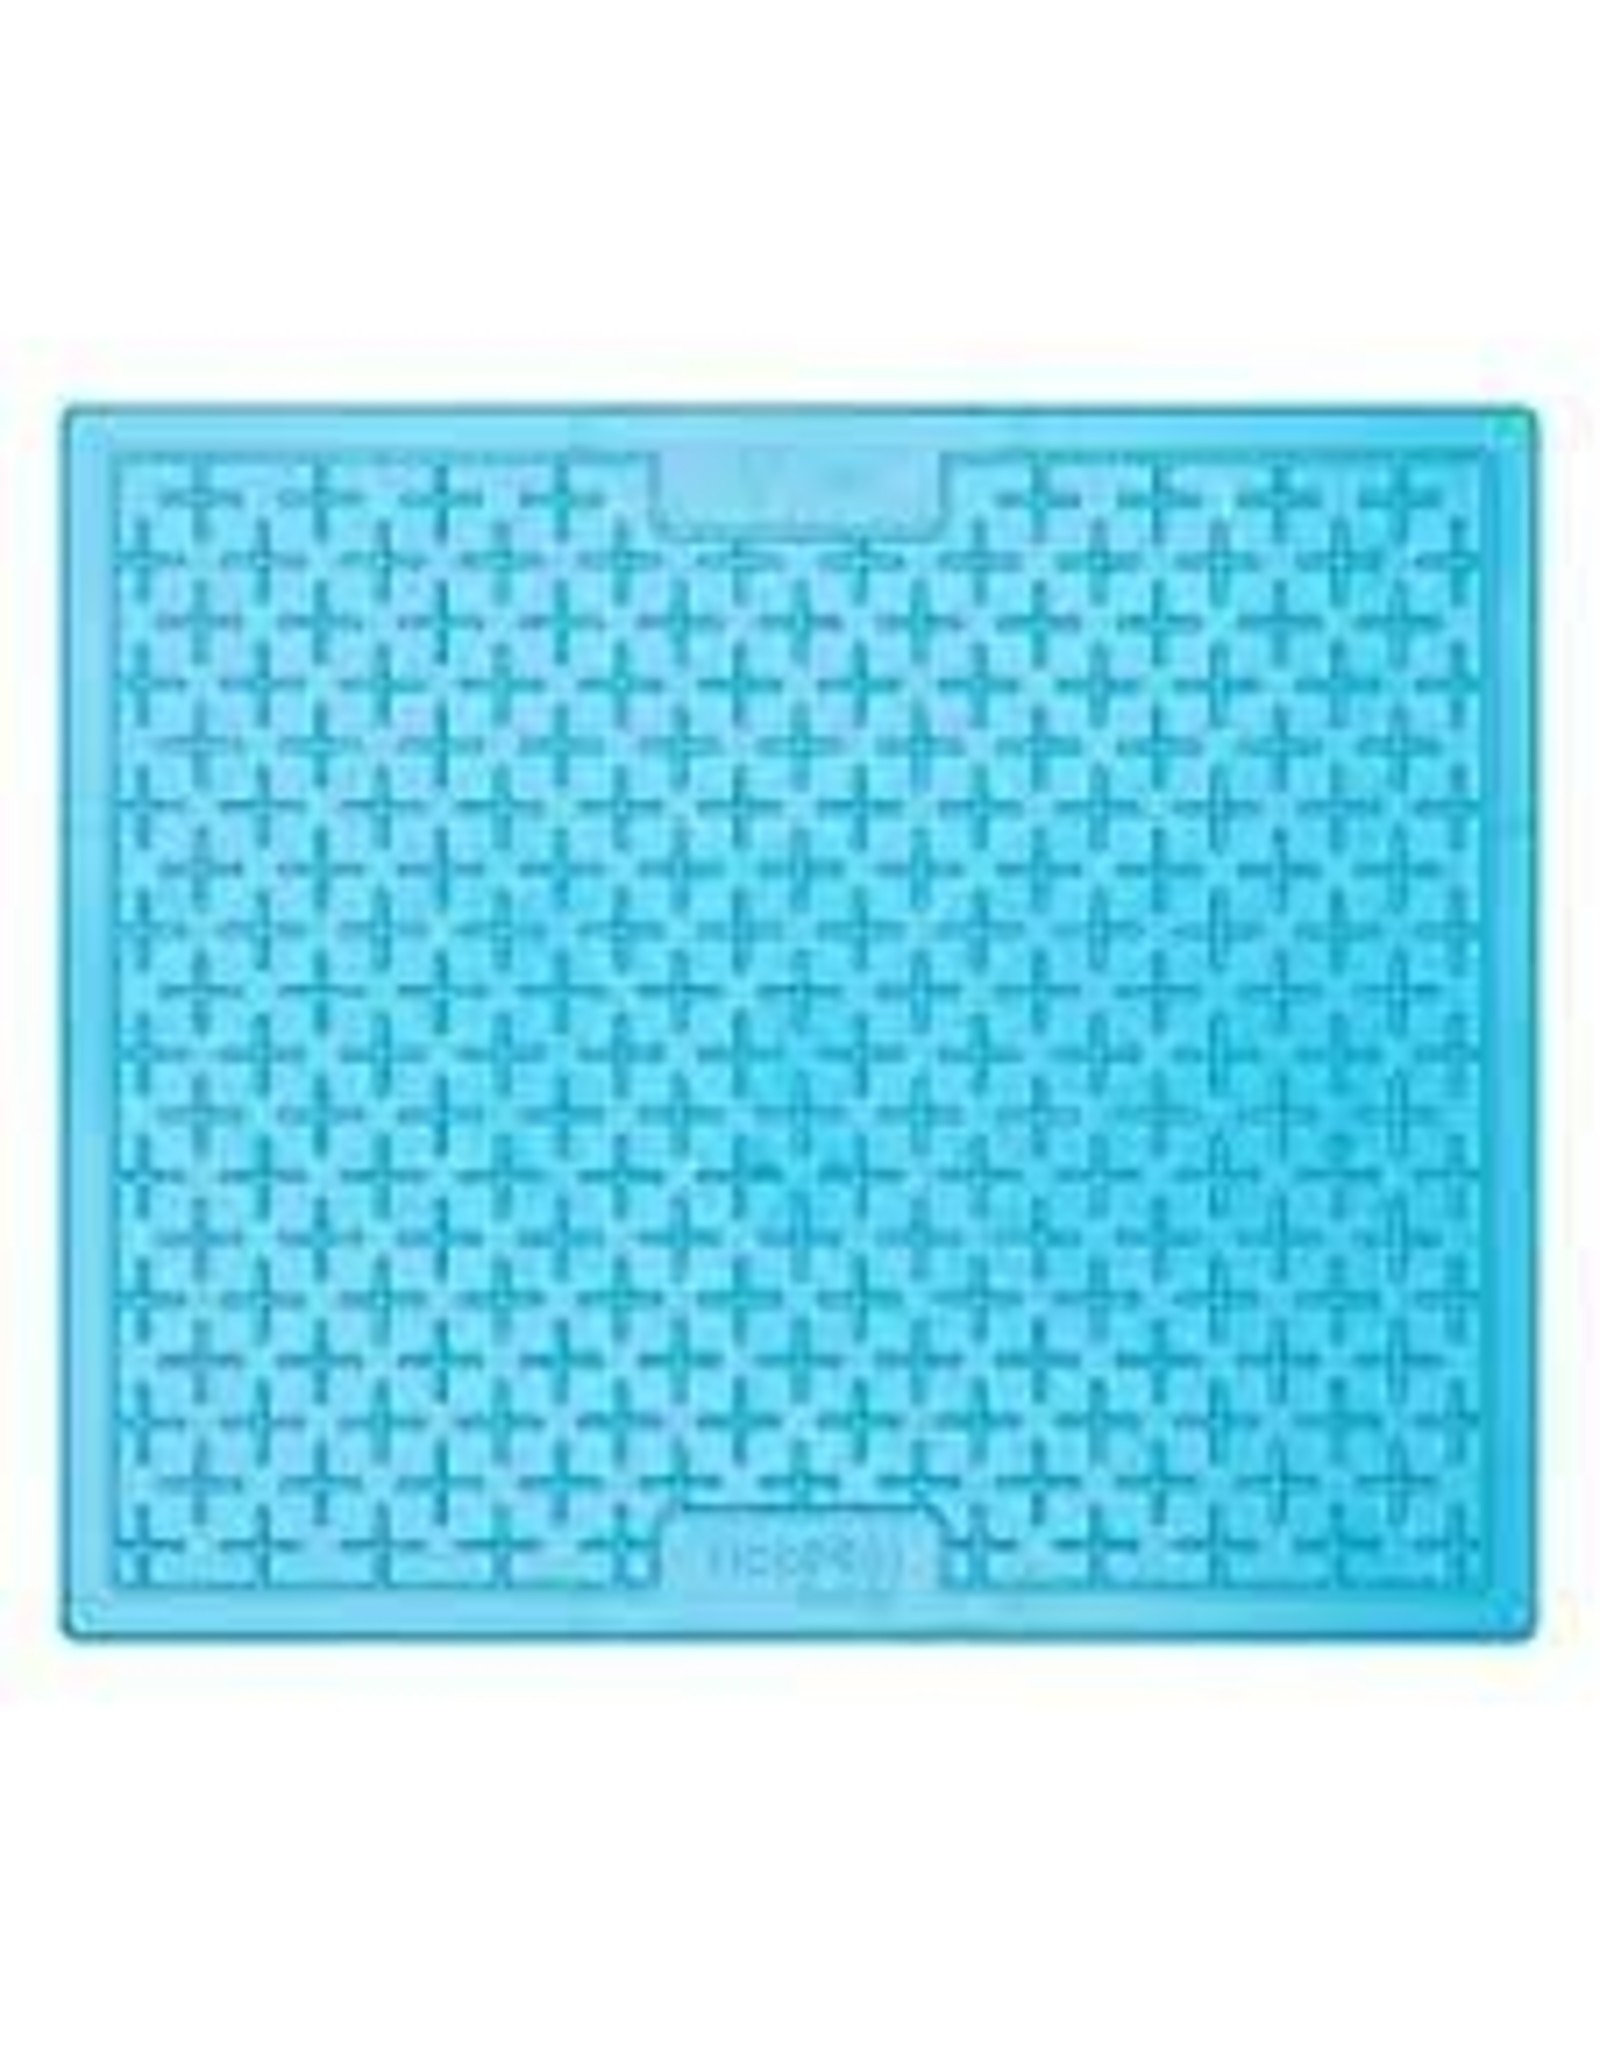 LickiMat Soother Dog Slow Feeder Mat, Turquoise, X-Large